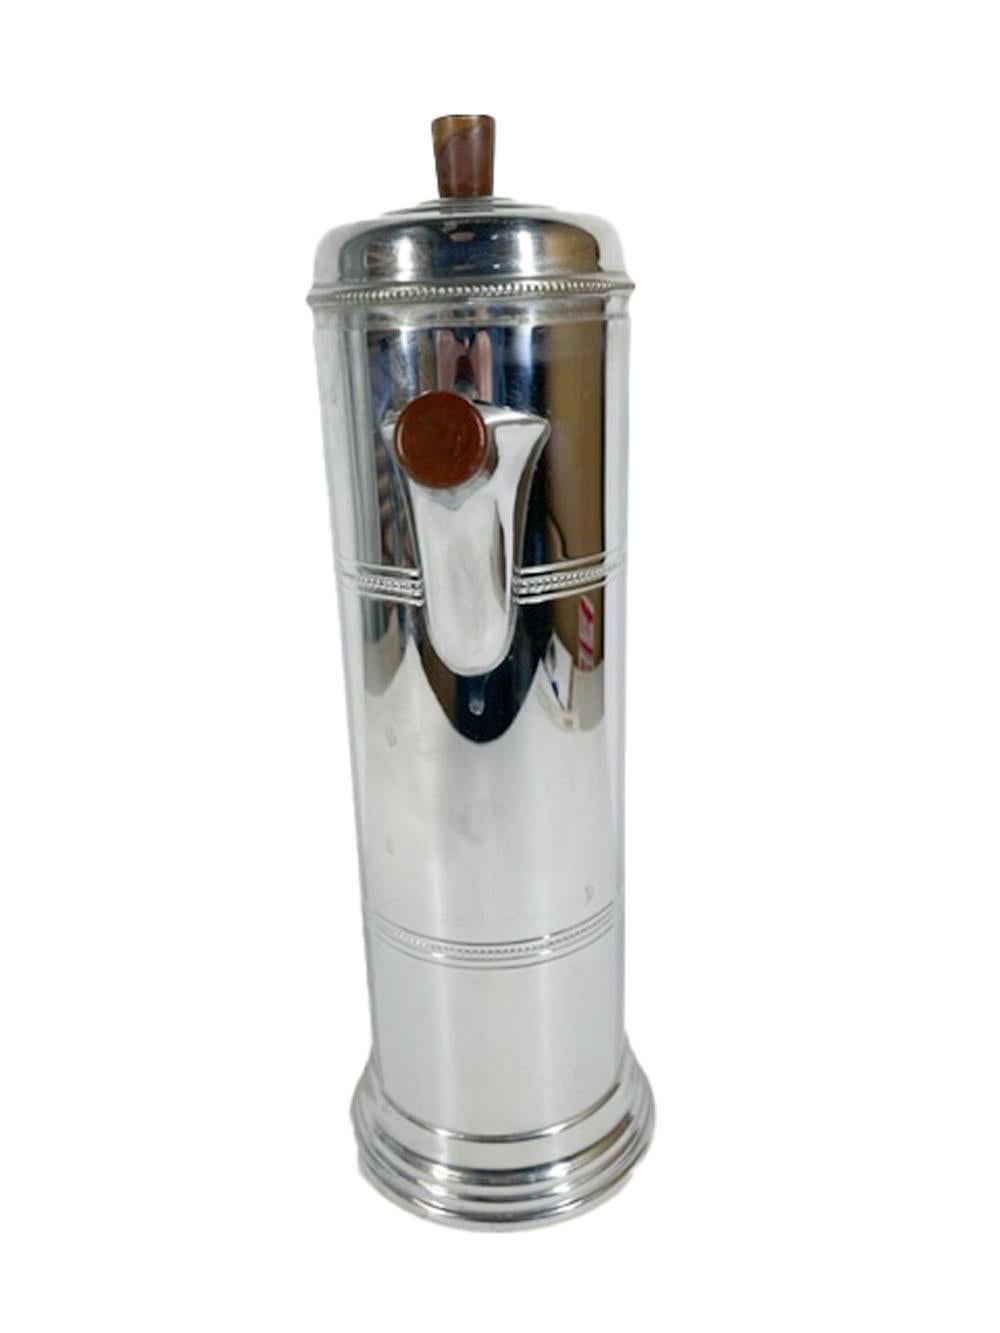 American Art Deco Cylindrical Chrome Cocktail Shaker with Chocolate Bakelite Handle